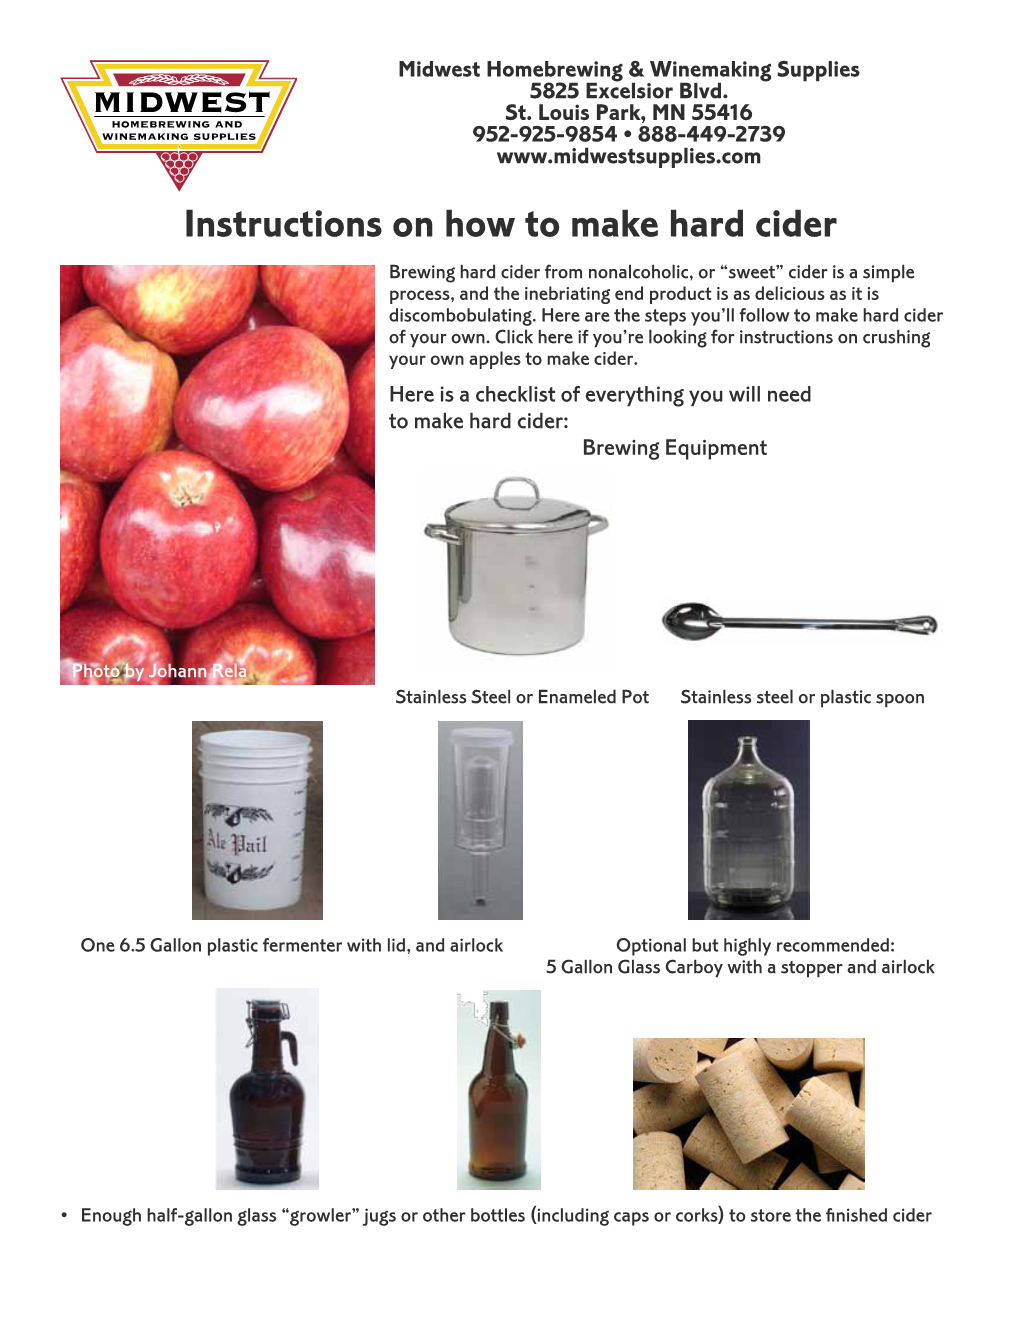 Cider Brewing Hard Cider from Nonalcoholic, Or “Sweet” Cider Is a Simple Process, and the Inebriating End Product Is As Delicious As It Is Discombobulating